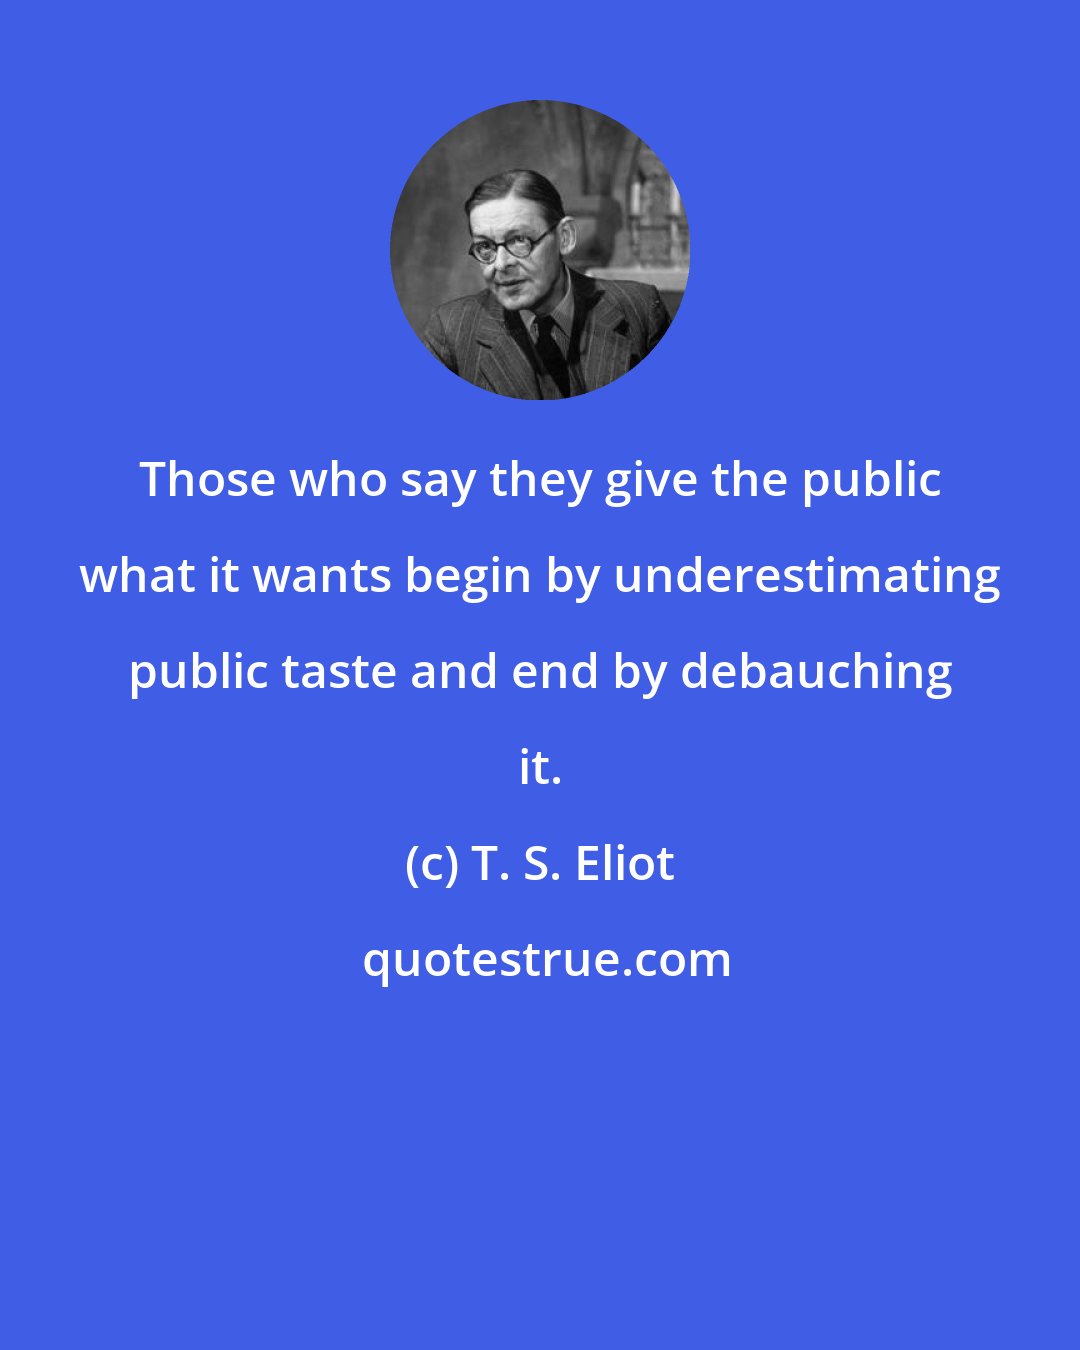 T. S. Eliot: Those who say they give the public what it wants begin by underestimating public taste and end by debauching it.